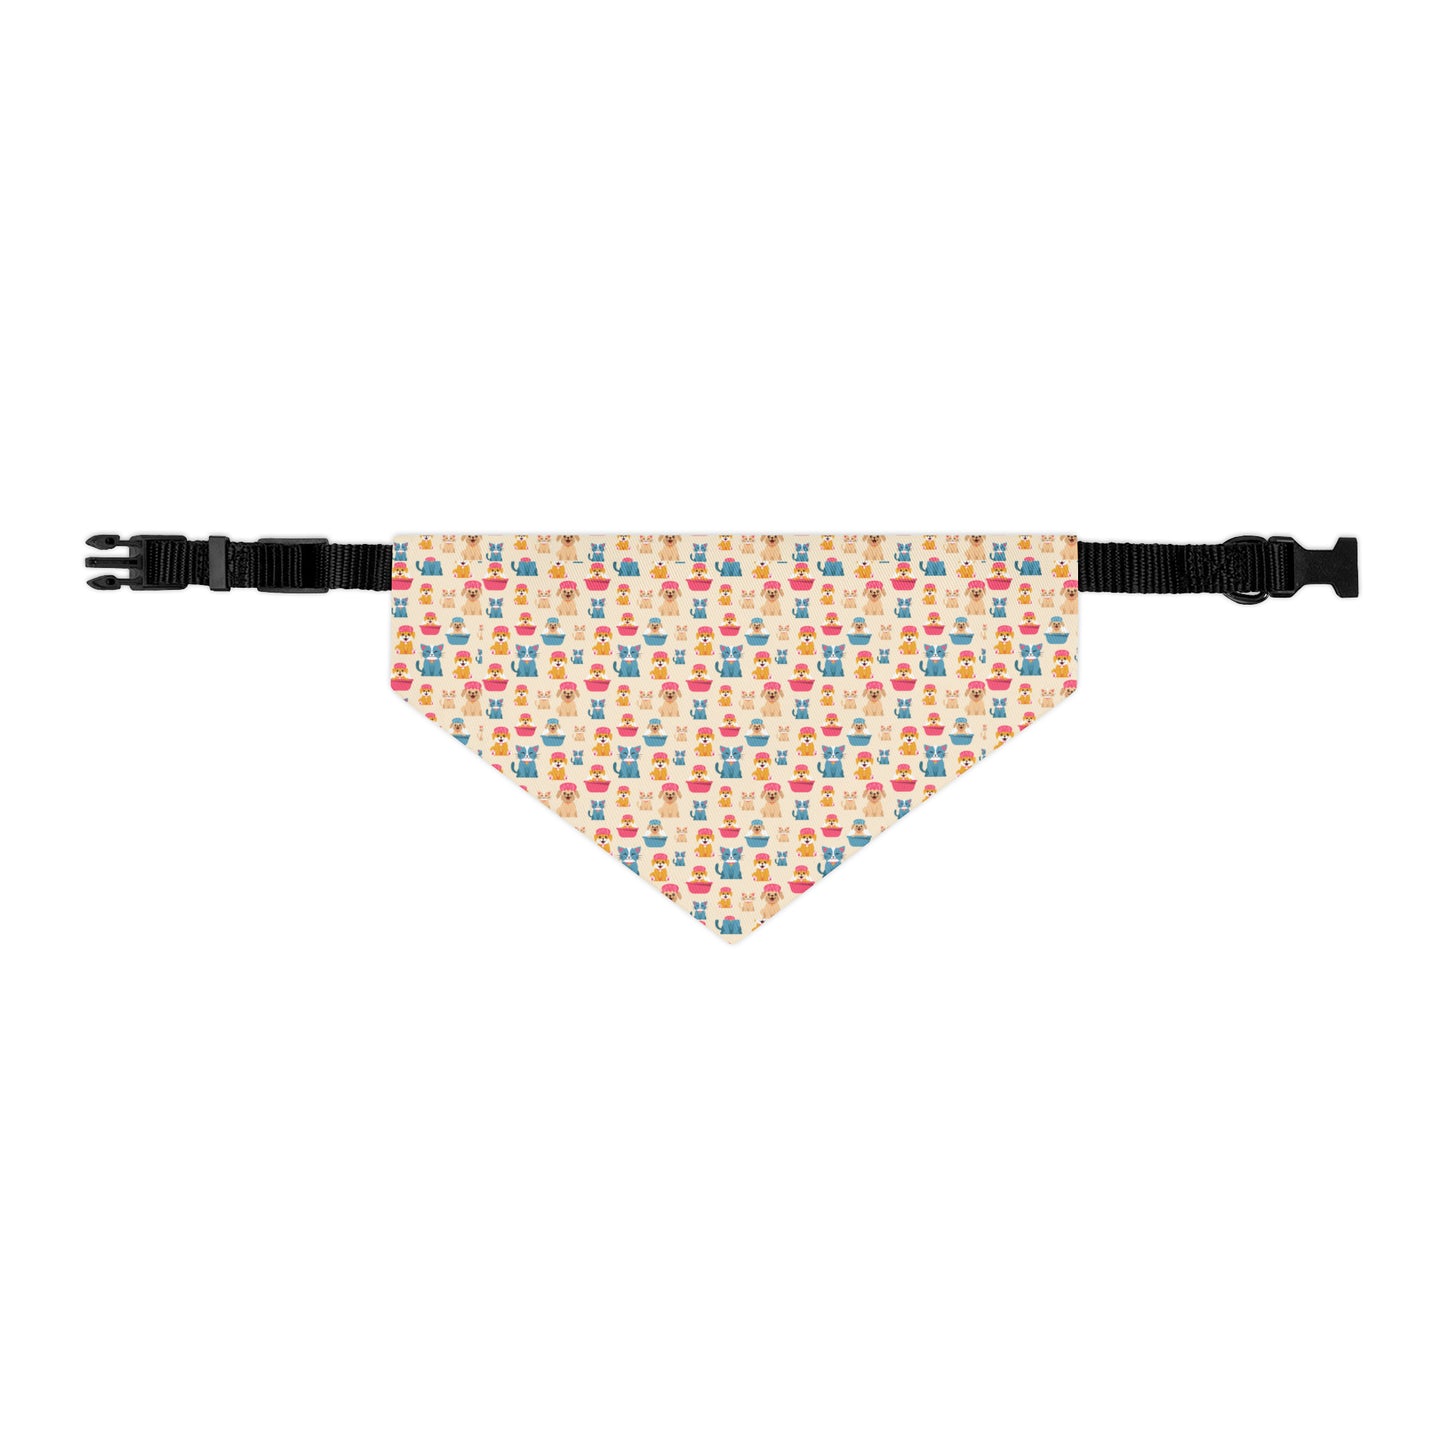 Niccie's Charming Dog Bandana Collar for Adorable Pets Cute Dog Patterns